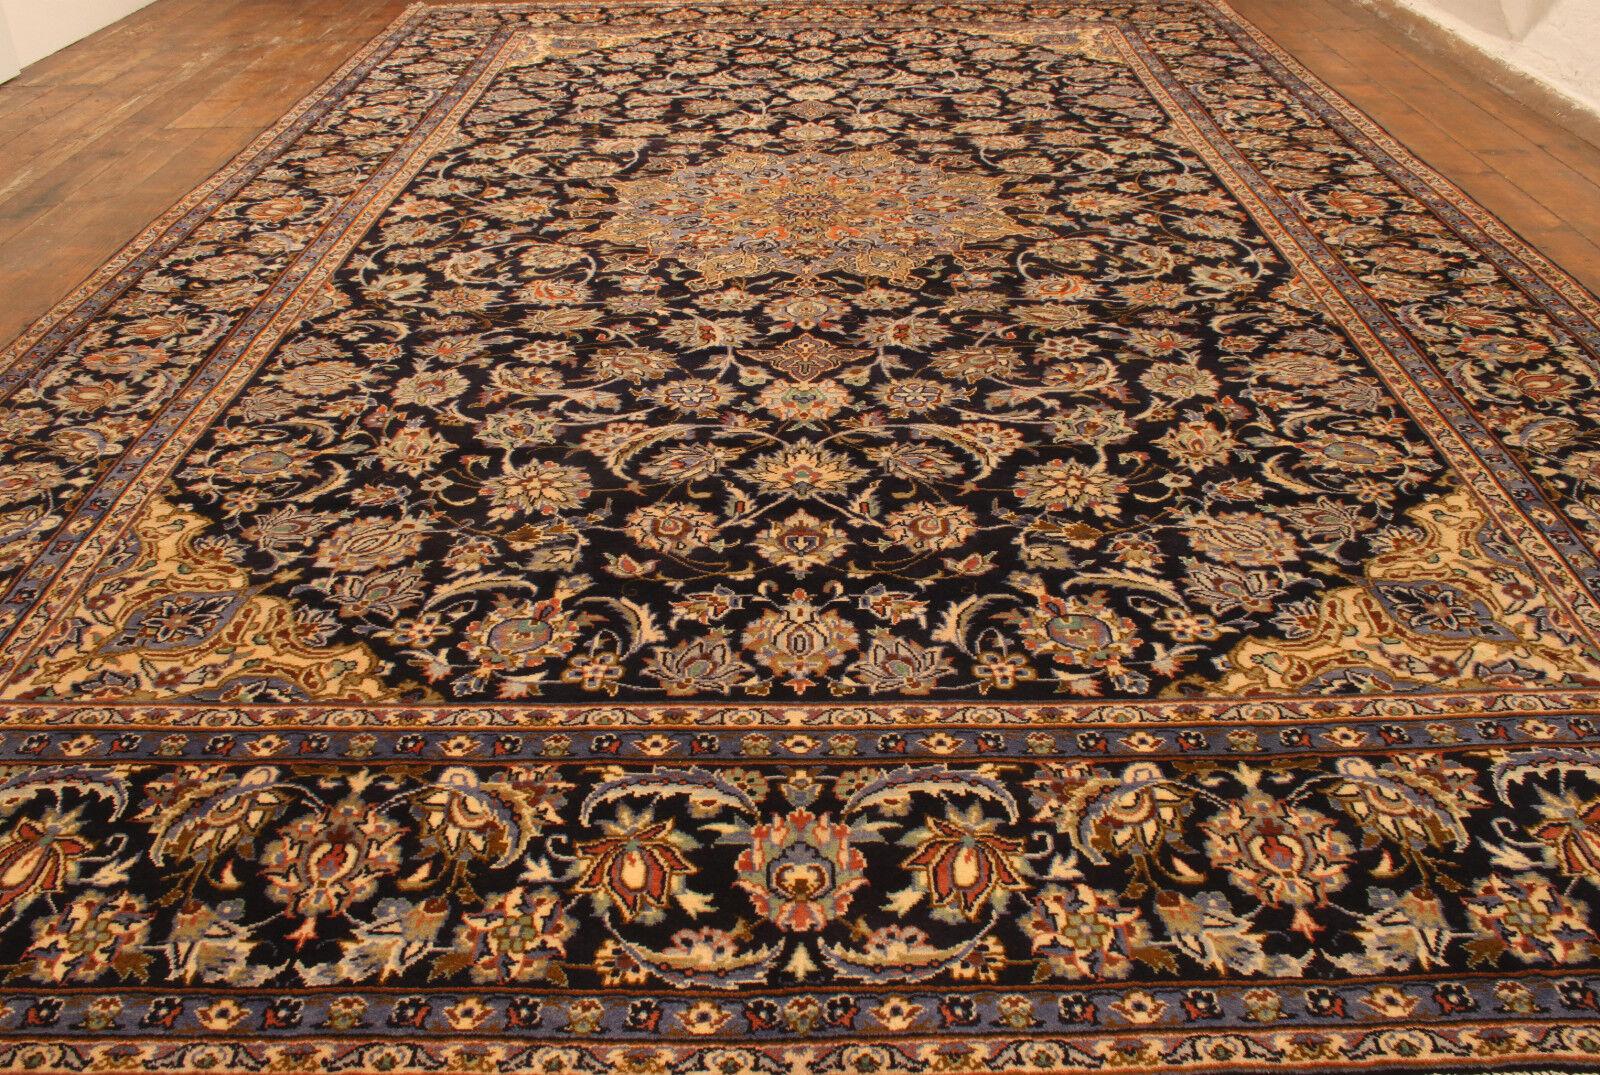 Wool Handmade Vintage Persian Style Tabriz Rug 9.5' x 14.5', 1970s - 1T35 For Sale